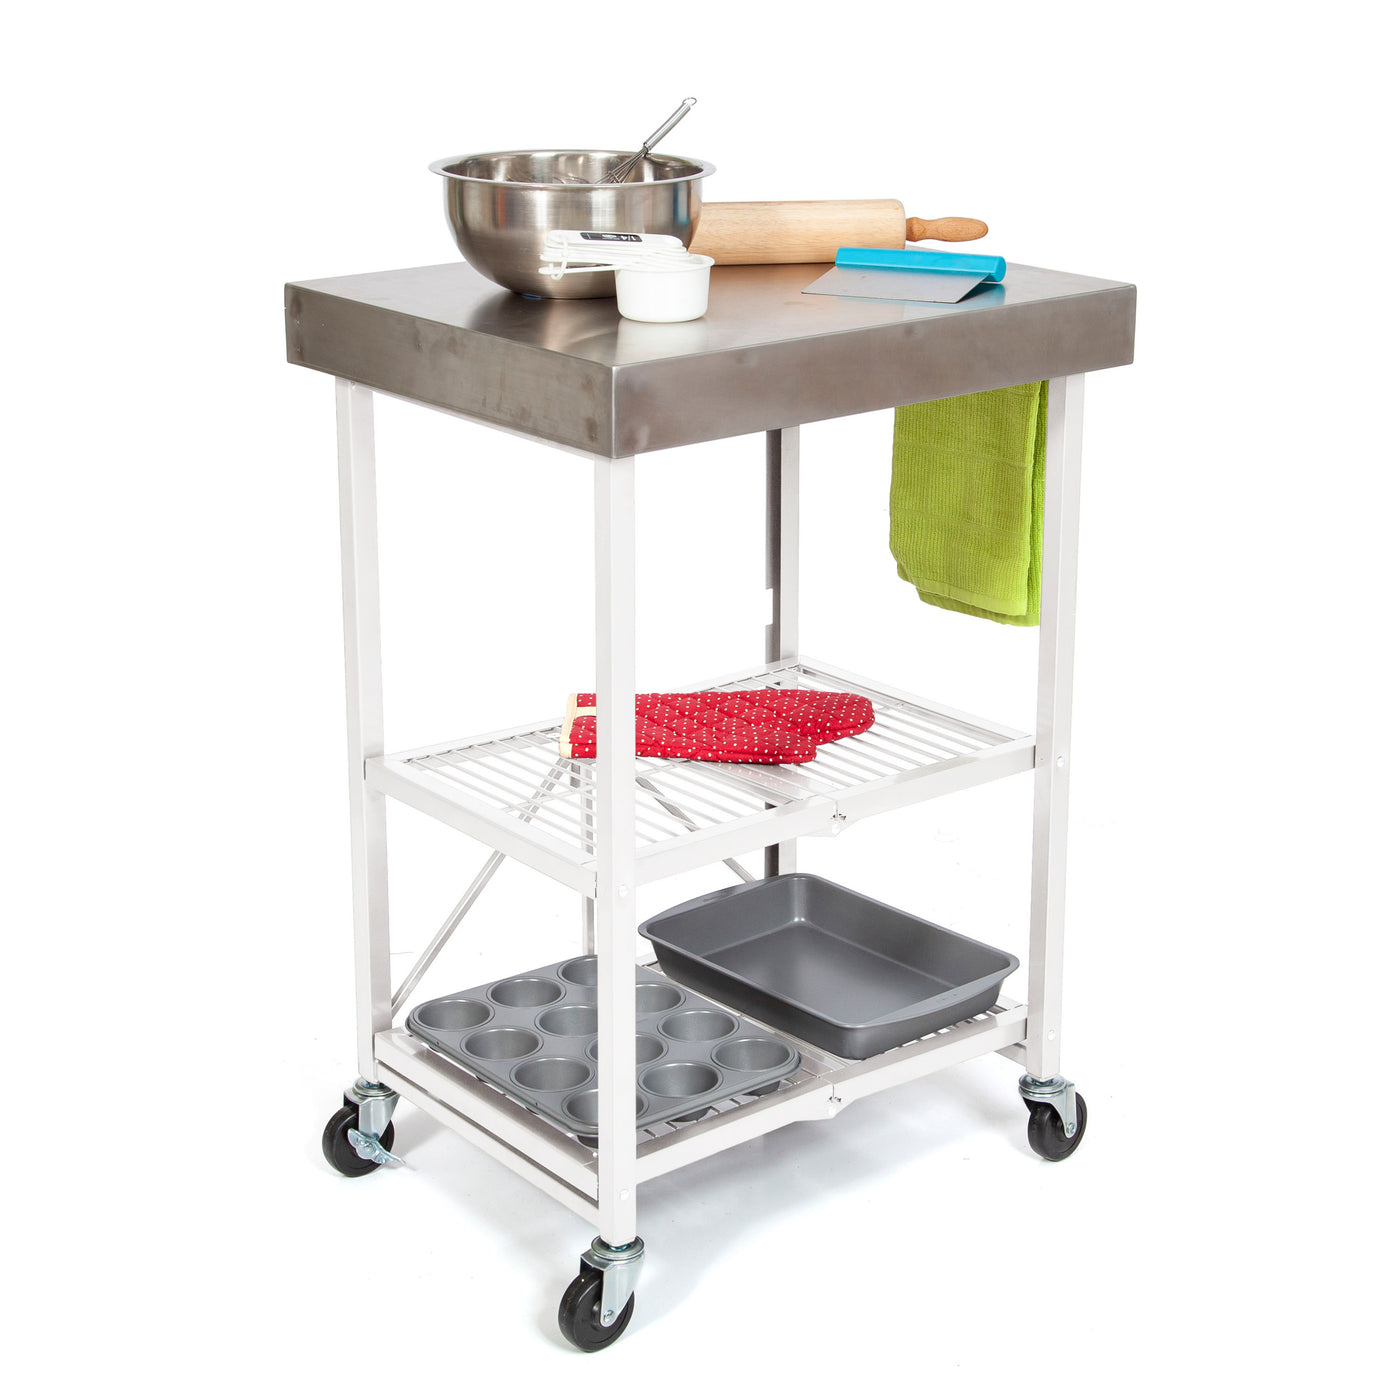 Origami Stainless Steel Foldable Kitchen Island with White Base and Wheels